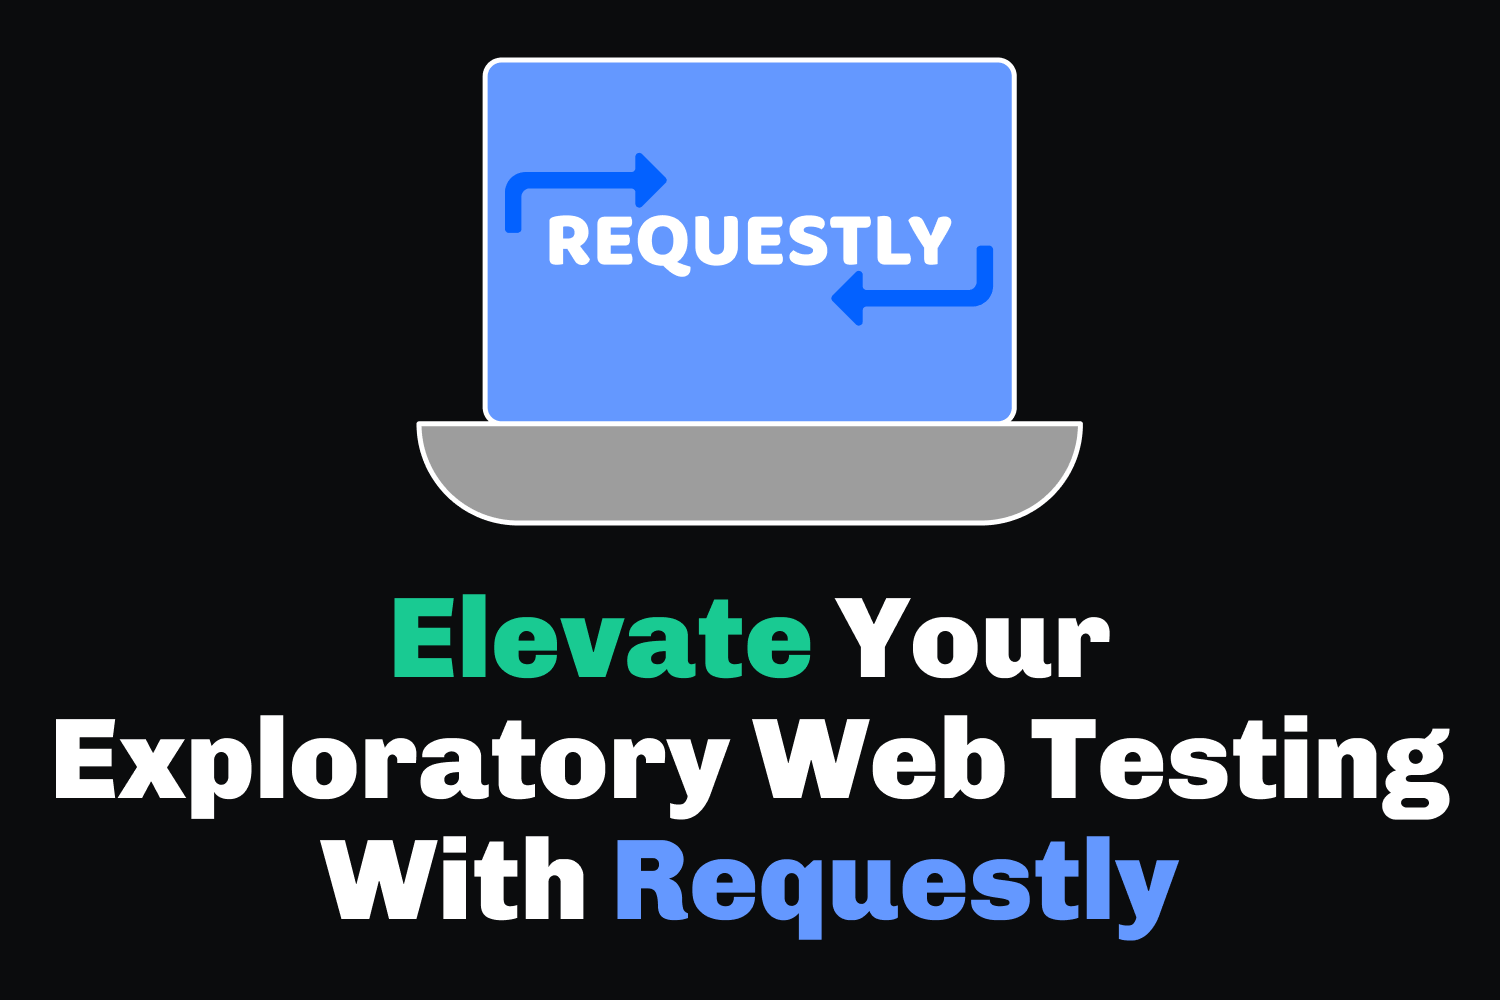 Elevate Your Exploratory Web Testing With Requestly